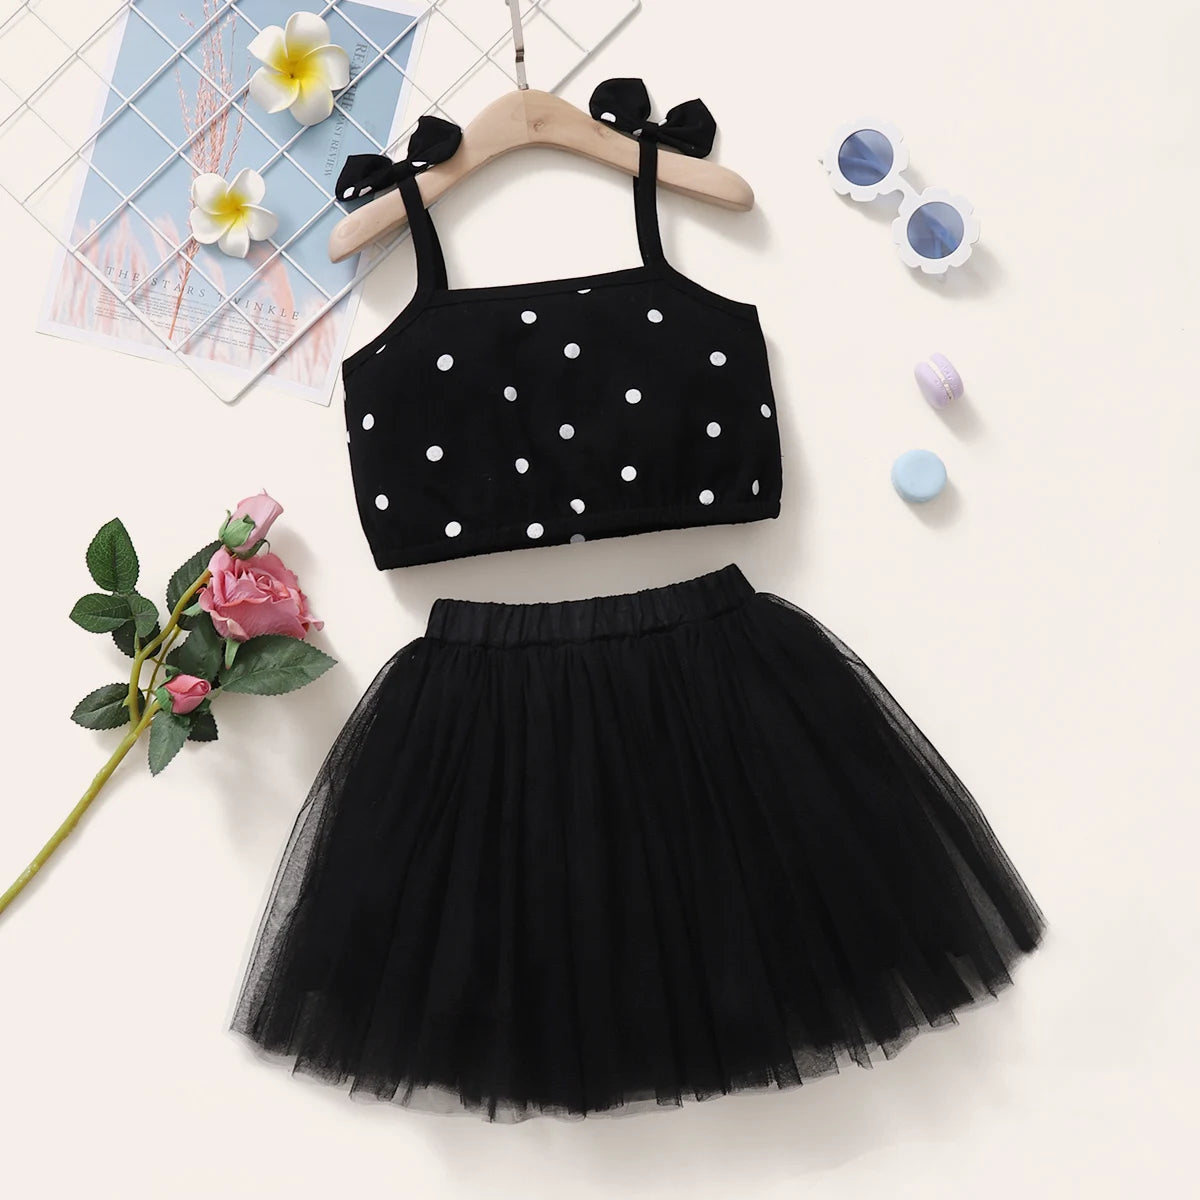 Kid Boyclothing Bow Strap Dots Tops Black Chiffon Puffy Skirt Summer Party Fashion Set Suitable for Female Babies Aged 1-6 Years